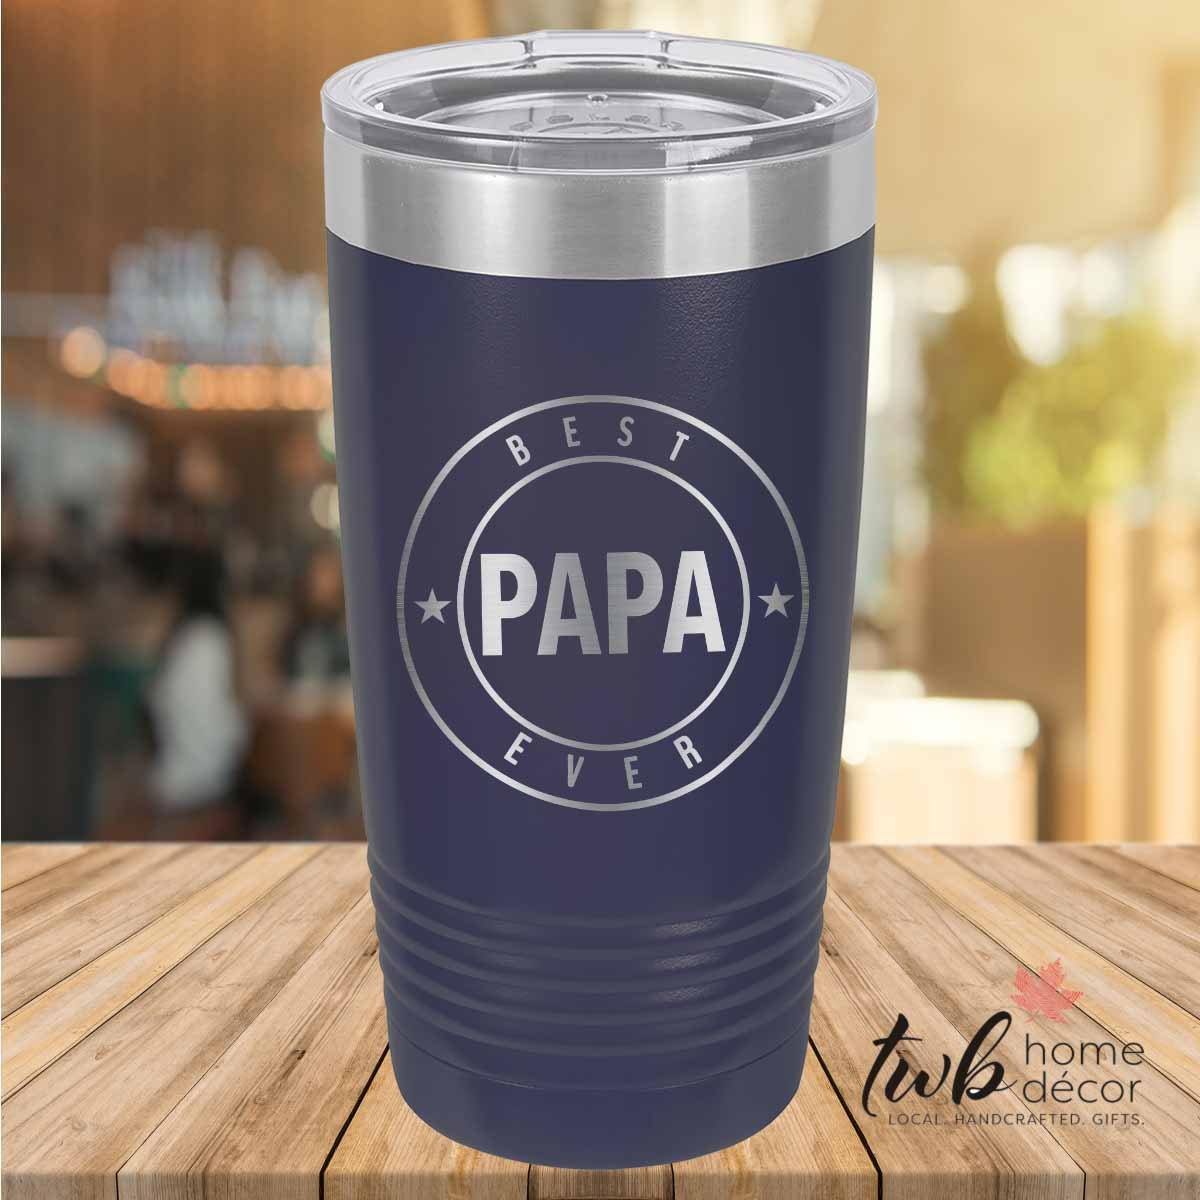 Best Papa Ever Thermal - TWB Home Decor